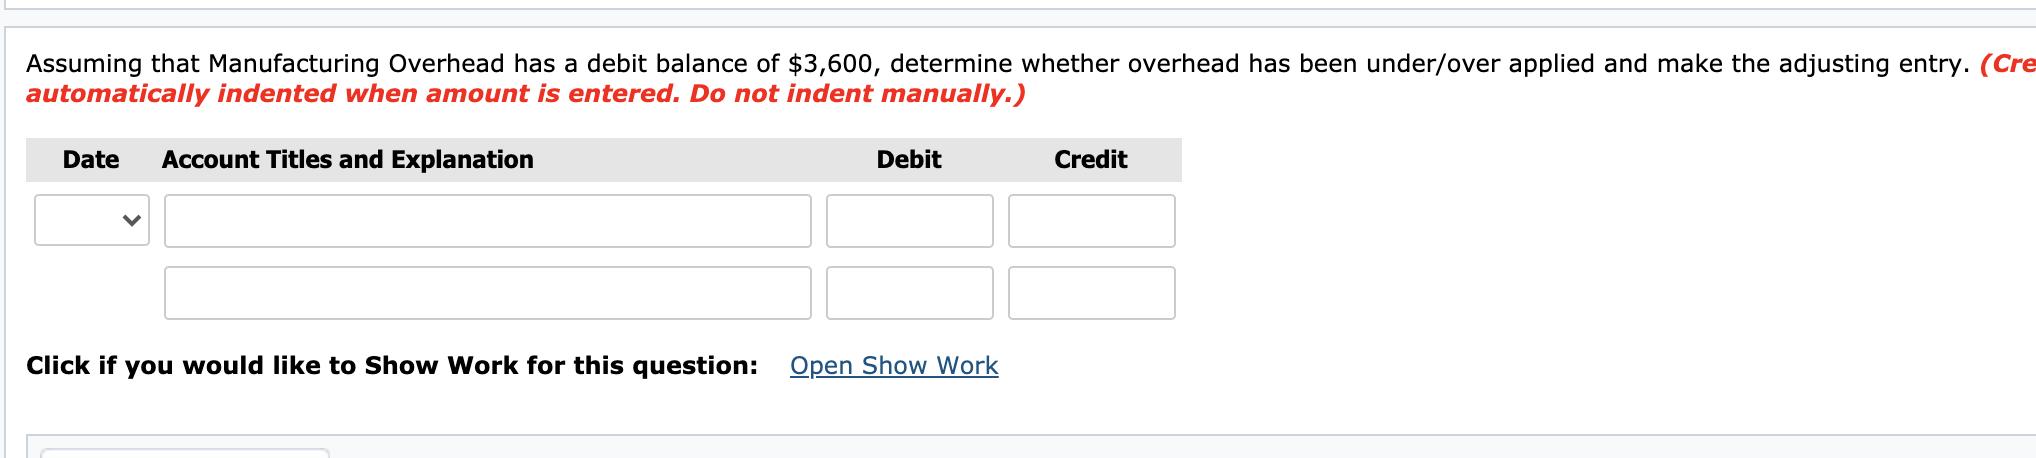 Assuming that Manufacturing Overhead has a debit balance of $3,600, determine whether overhead has been under/over applied an